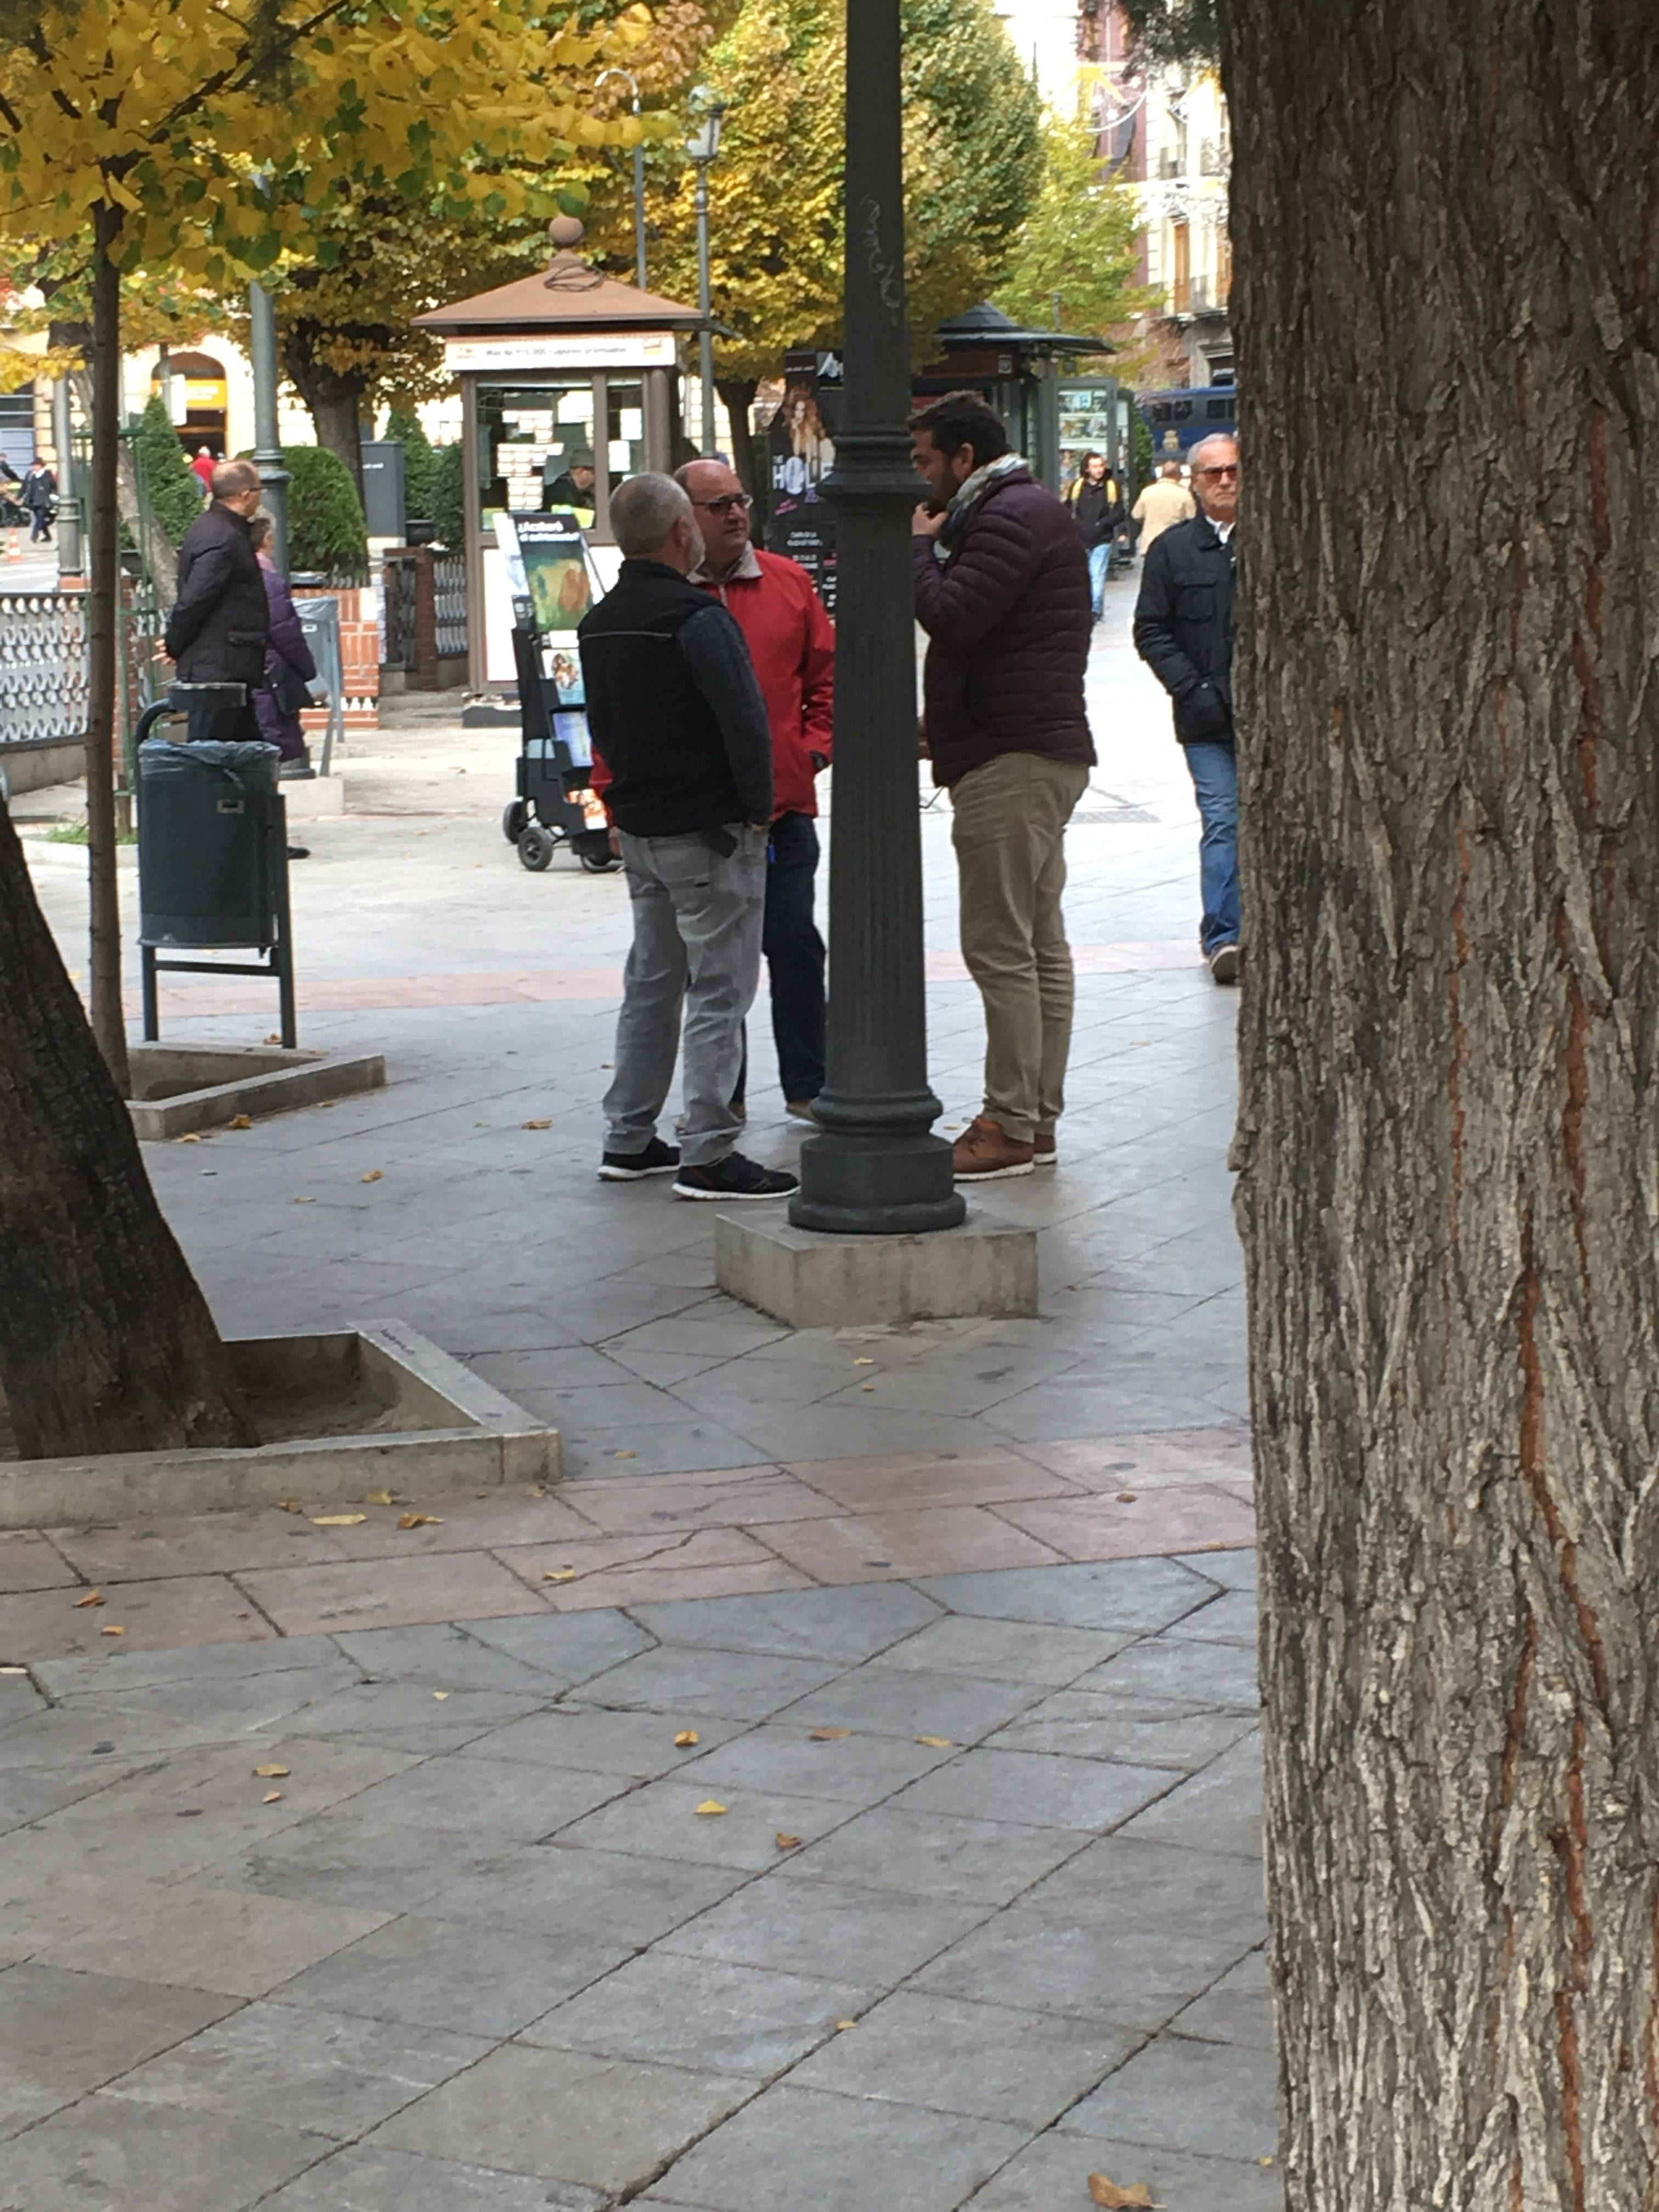 Small group of people standing around talking